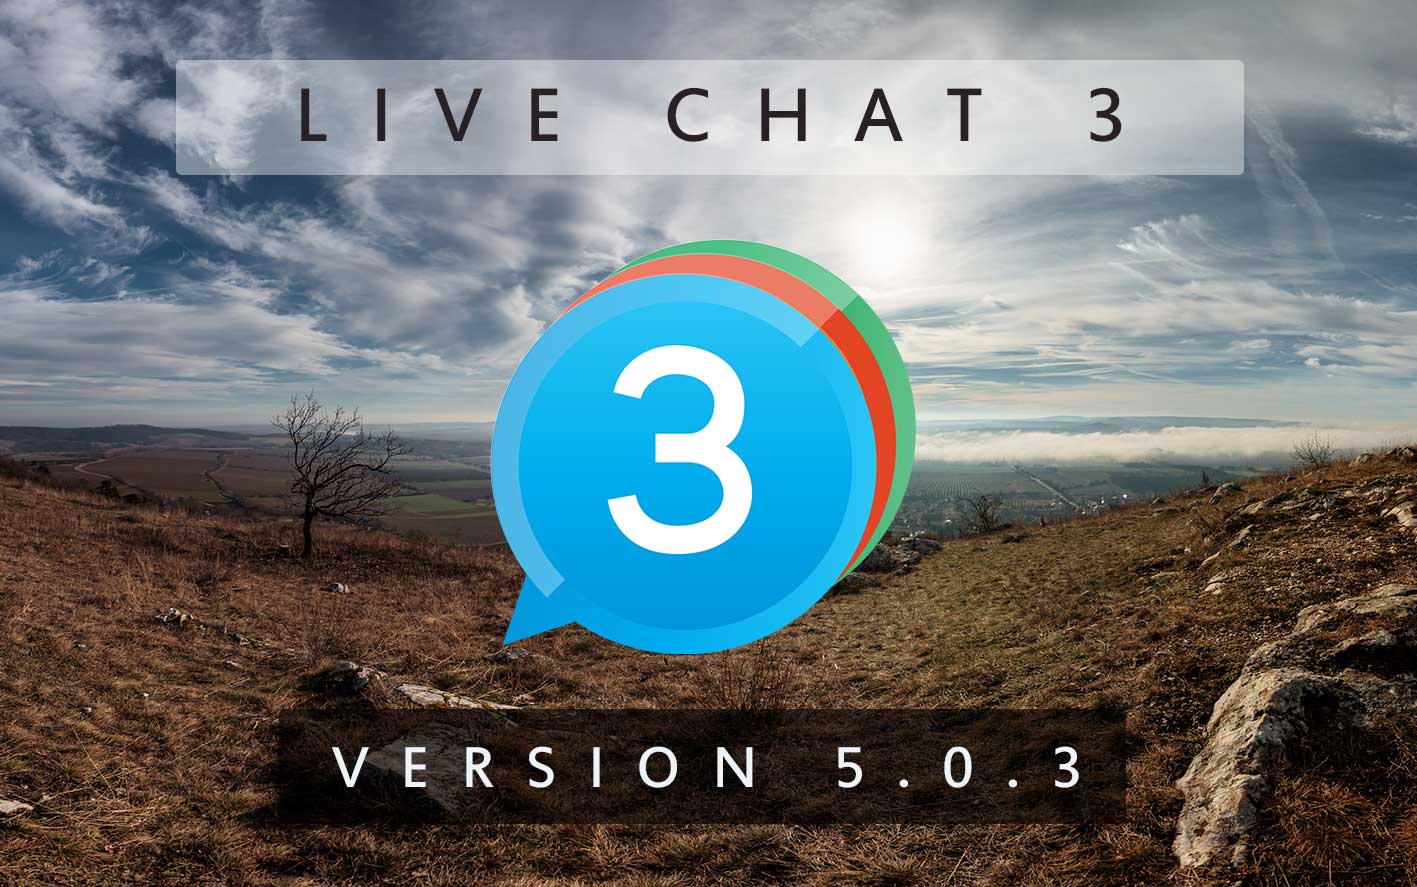 Live Chat 3 - Version 5.0.3